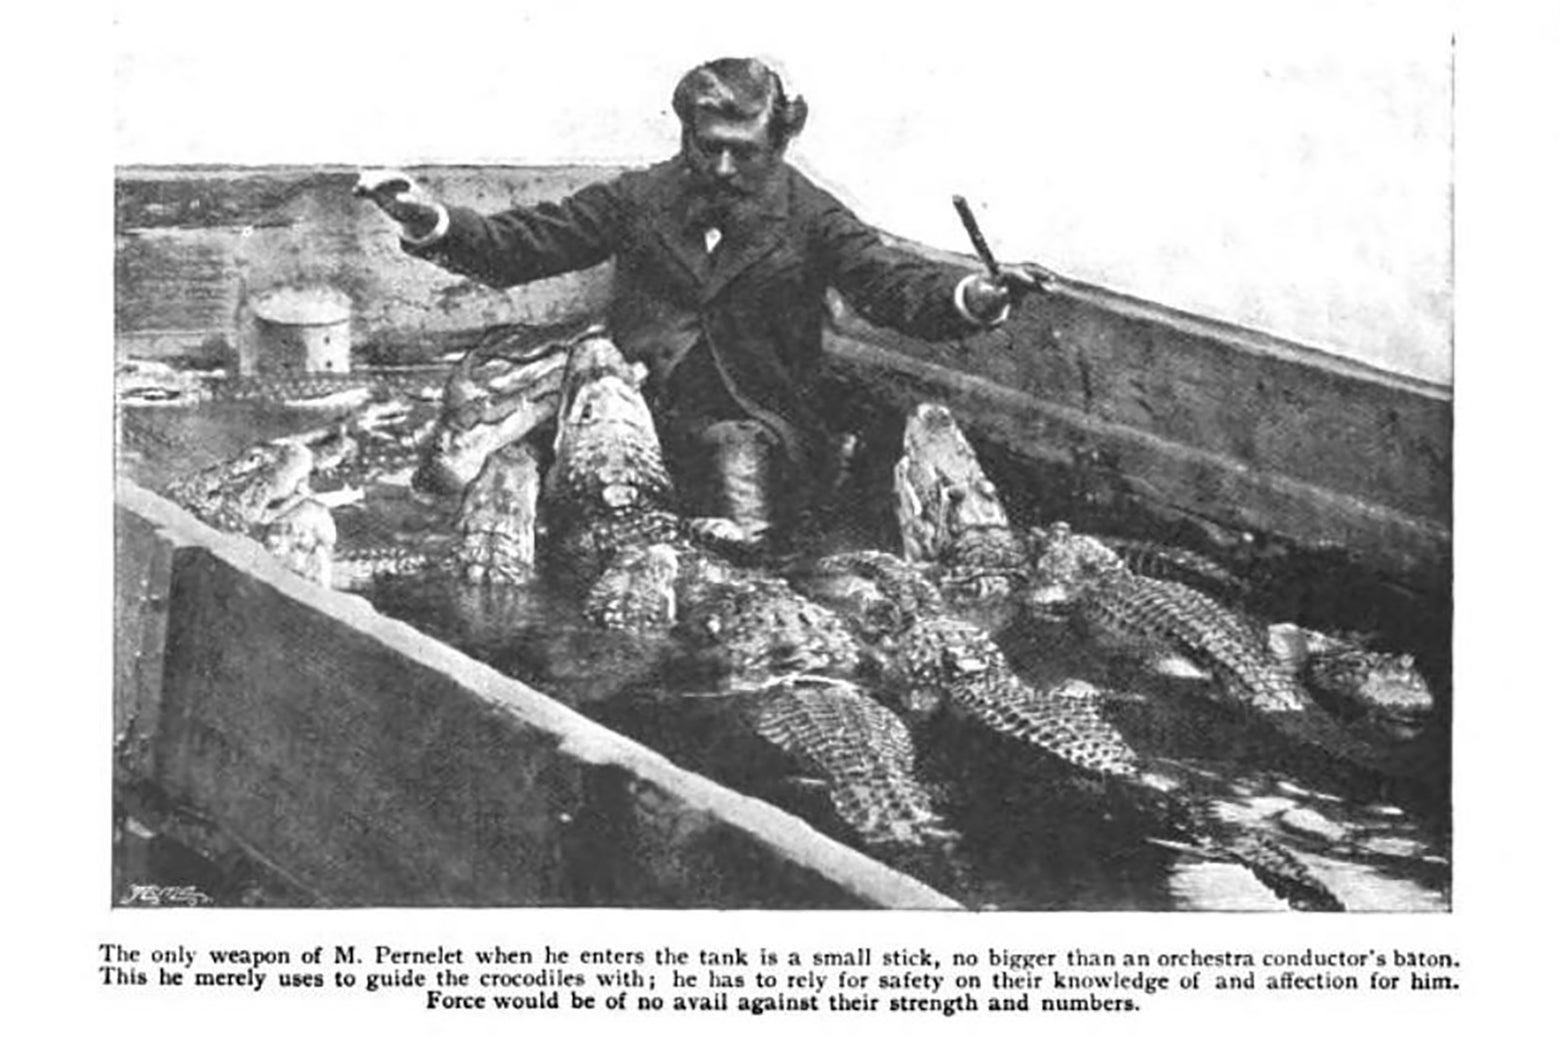 An old photograph of a man standing in a concrete tub filled with alligators. The man is holding a baton, as if conducting.